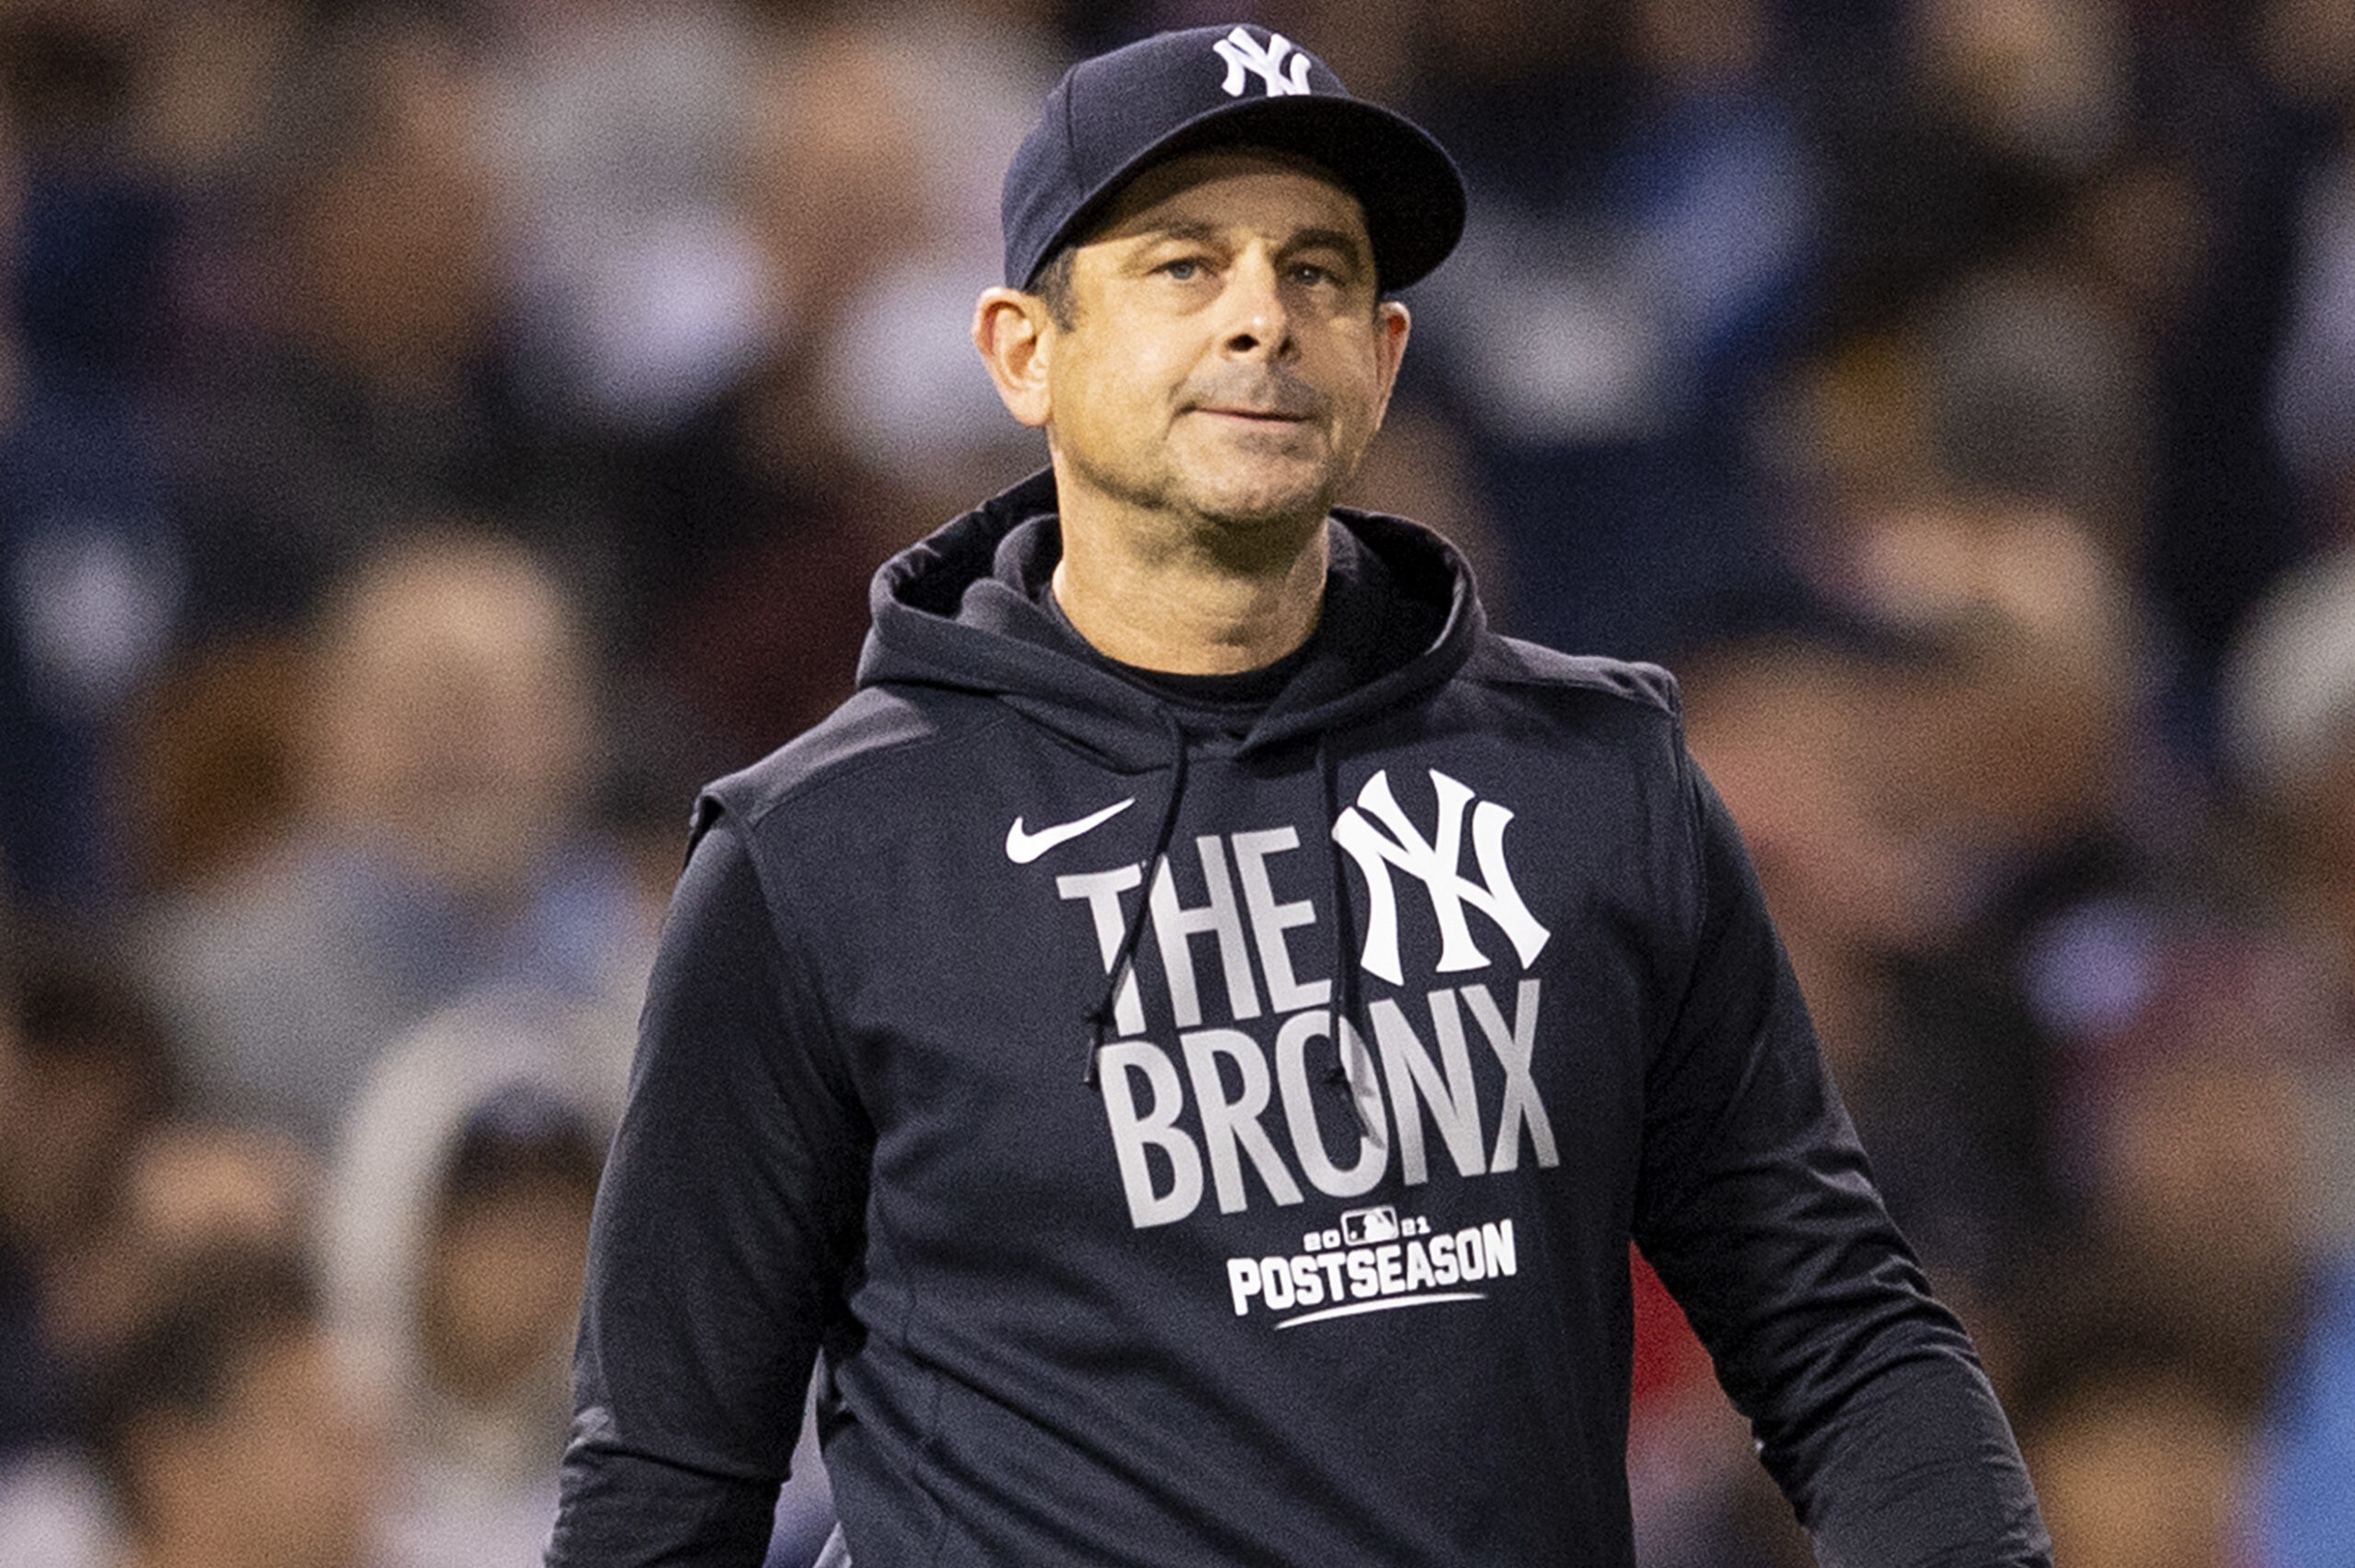 Who is the Manager of the New York Yankees